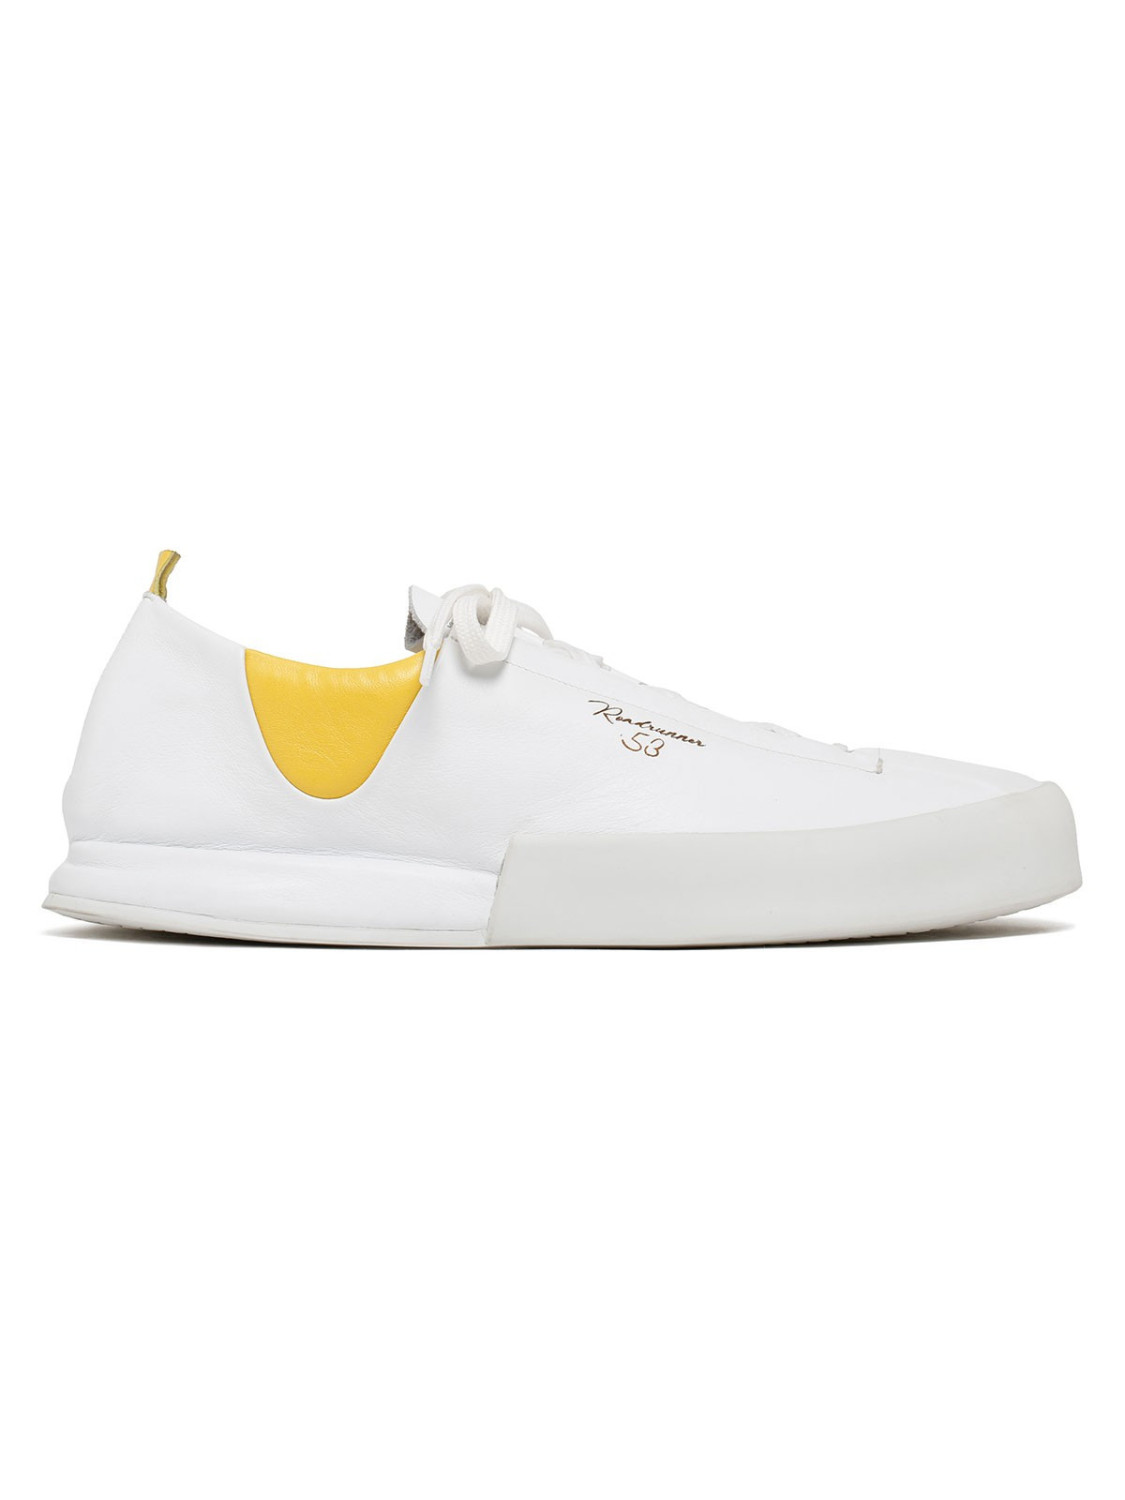 Epis white and yellow sneakers